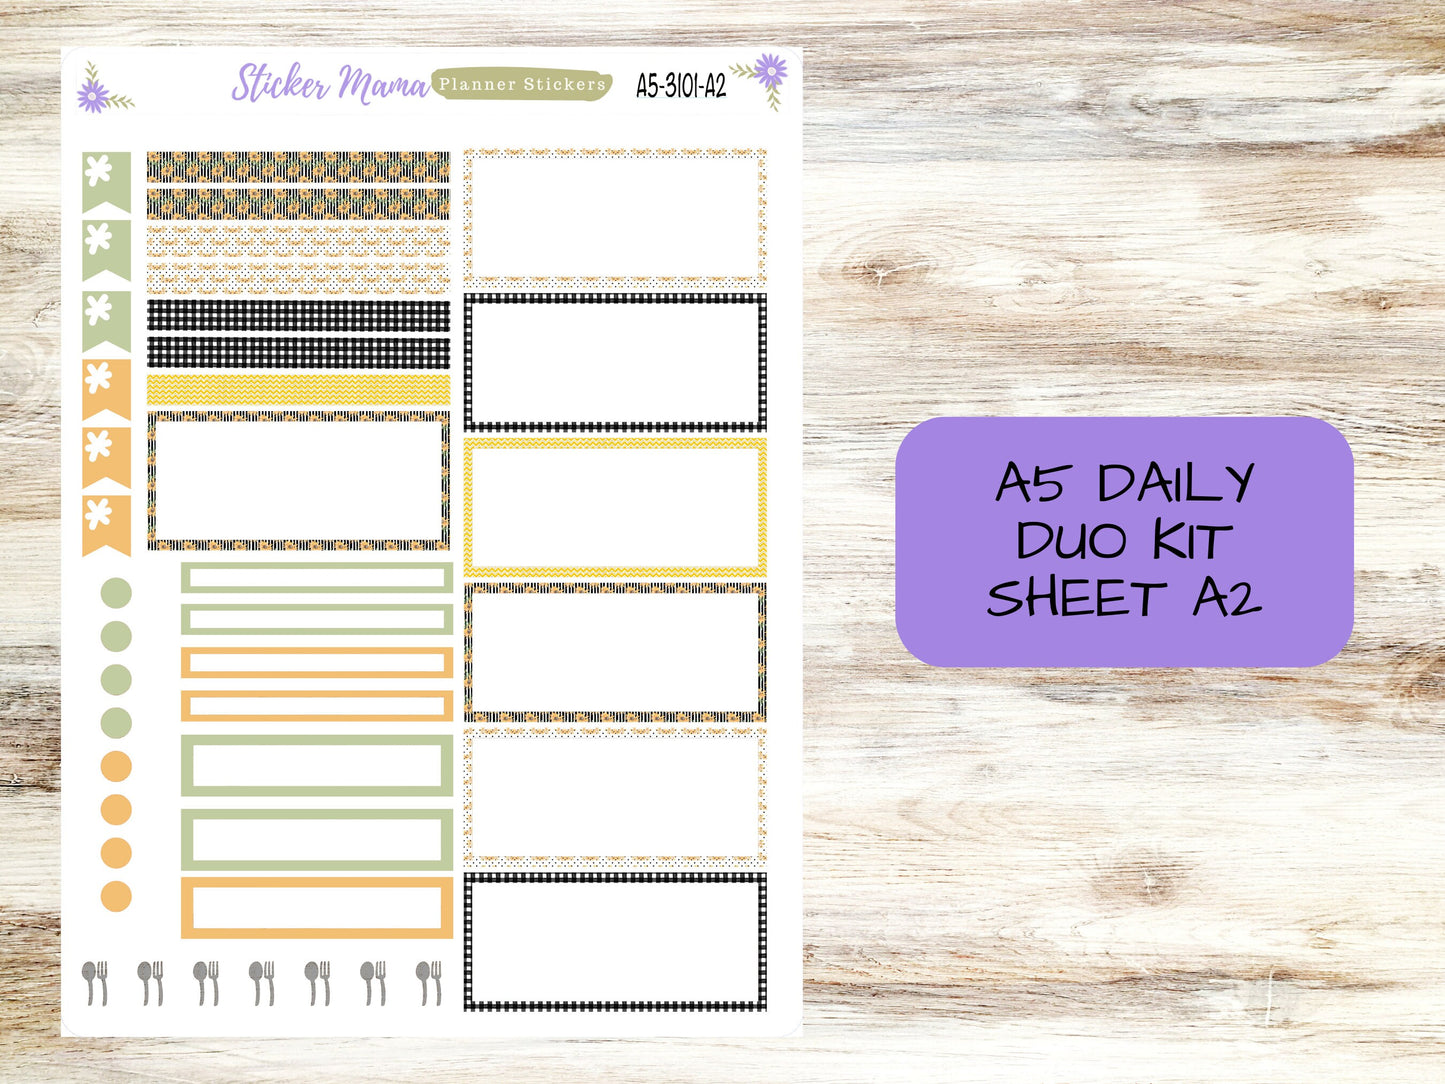 A5-DAILY DUO-Kit #3101 || Blooming Sunflowers || Planner Stickers - Daily Duo A5 Planner - Daily Duo Stickers - Daily Planner